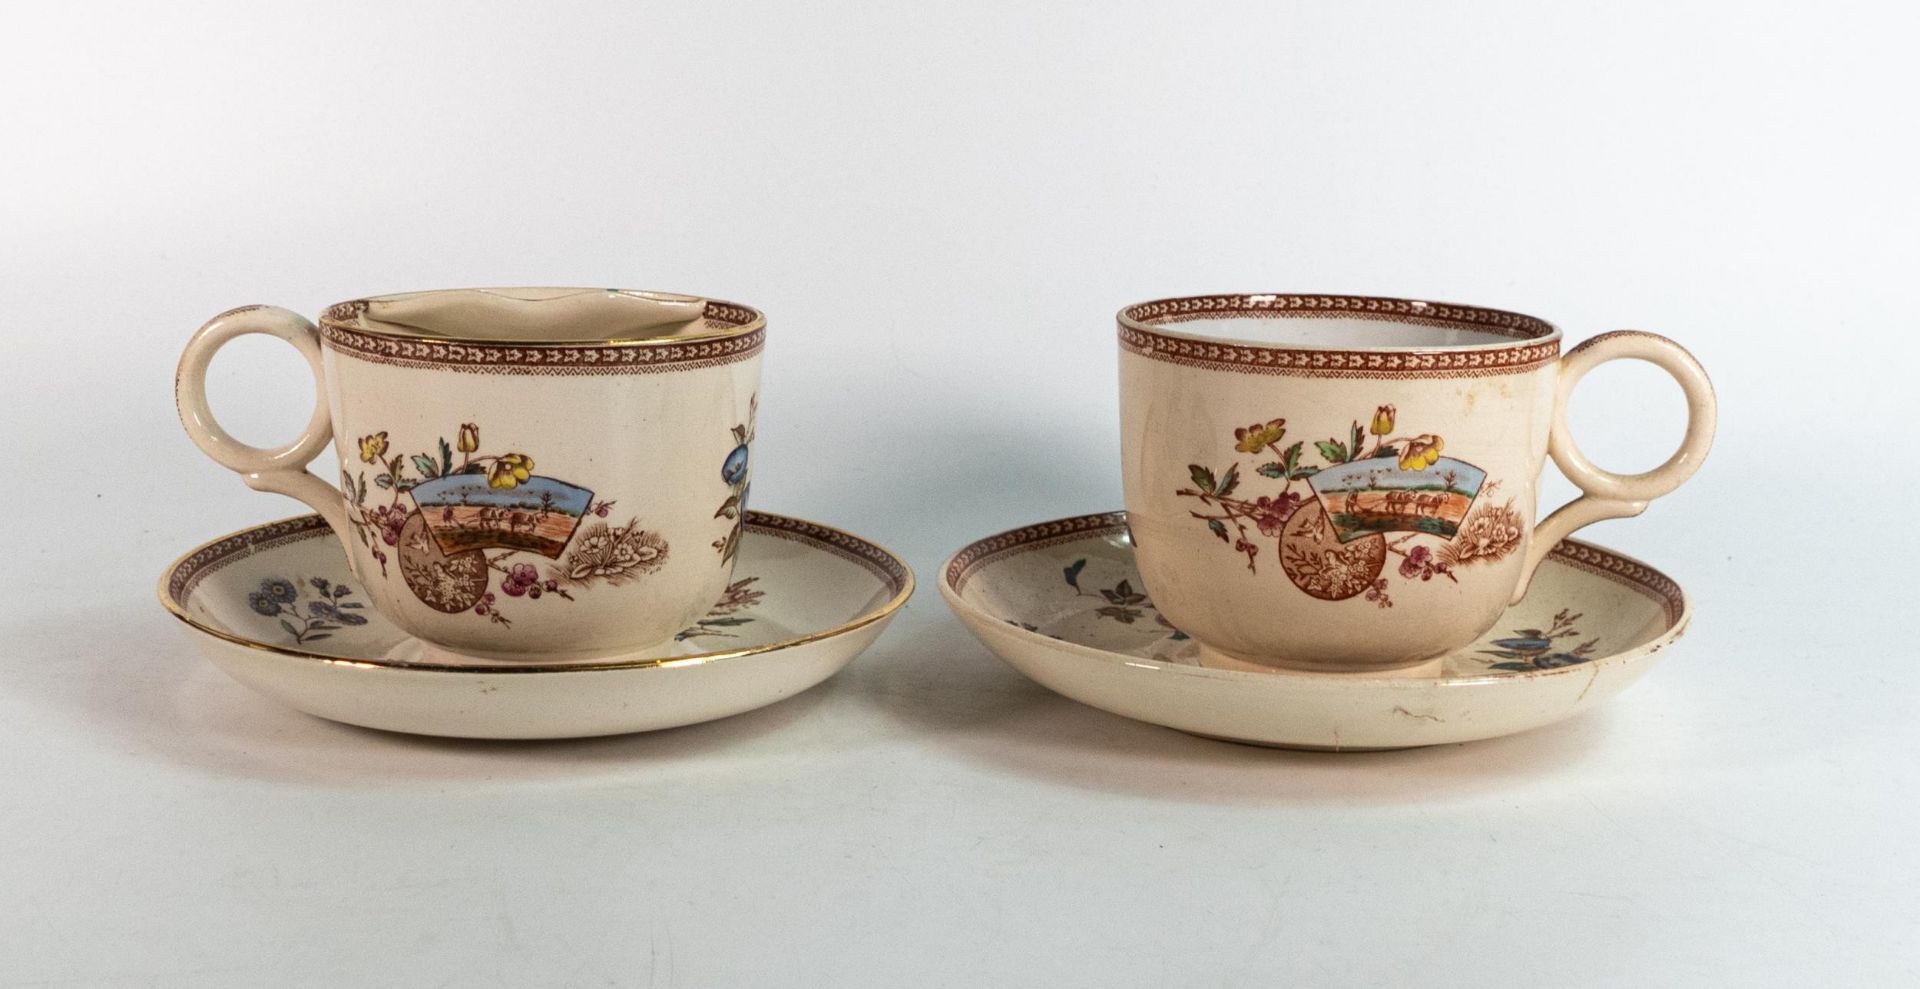 J.F wileman Mammoth cup & saucer, four seasons pattern with mammoth moustache cup and saucer ( - Image 2 of 4